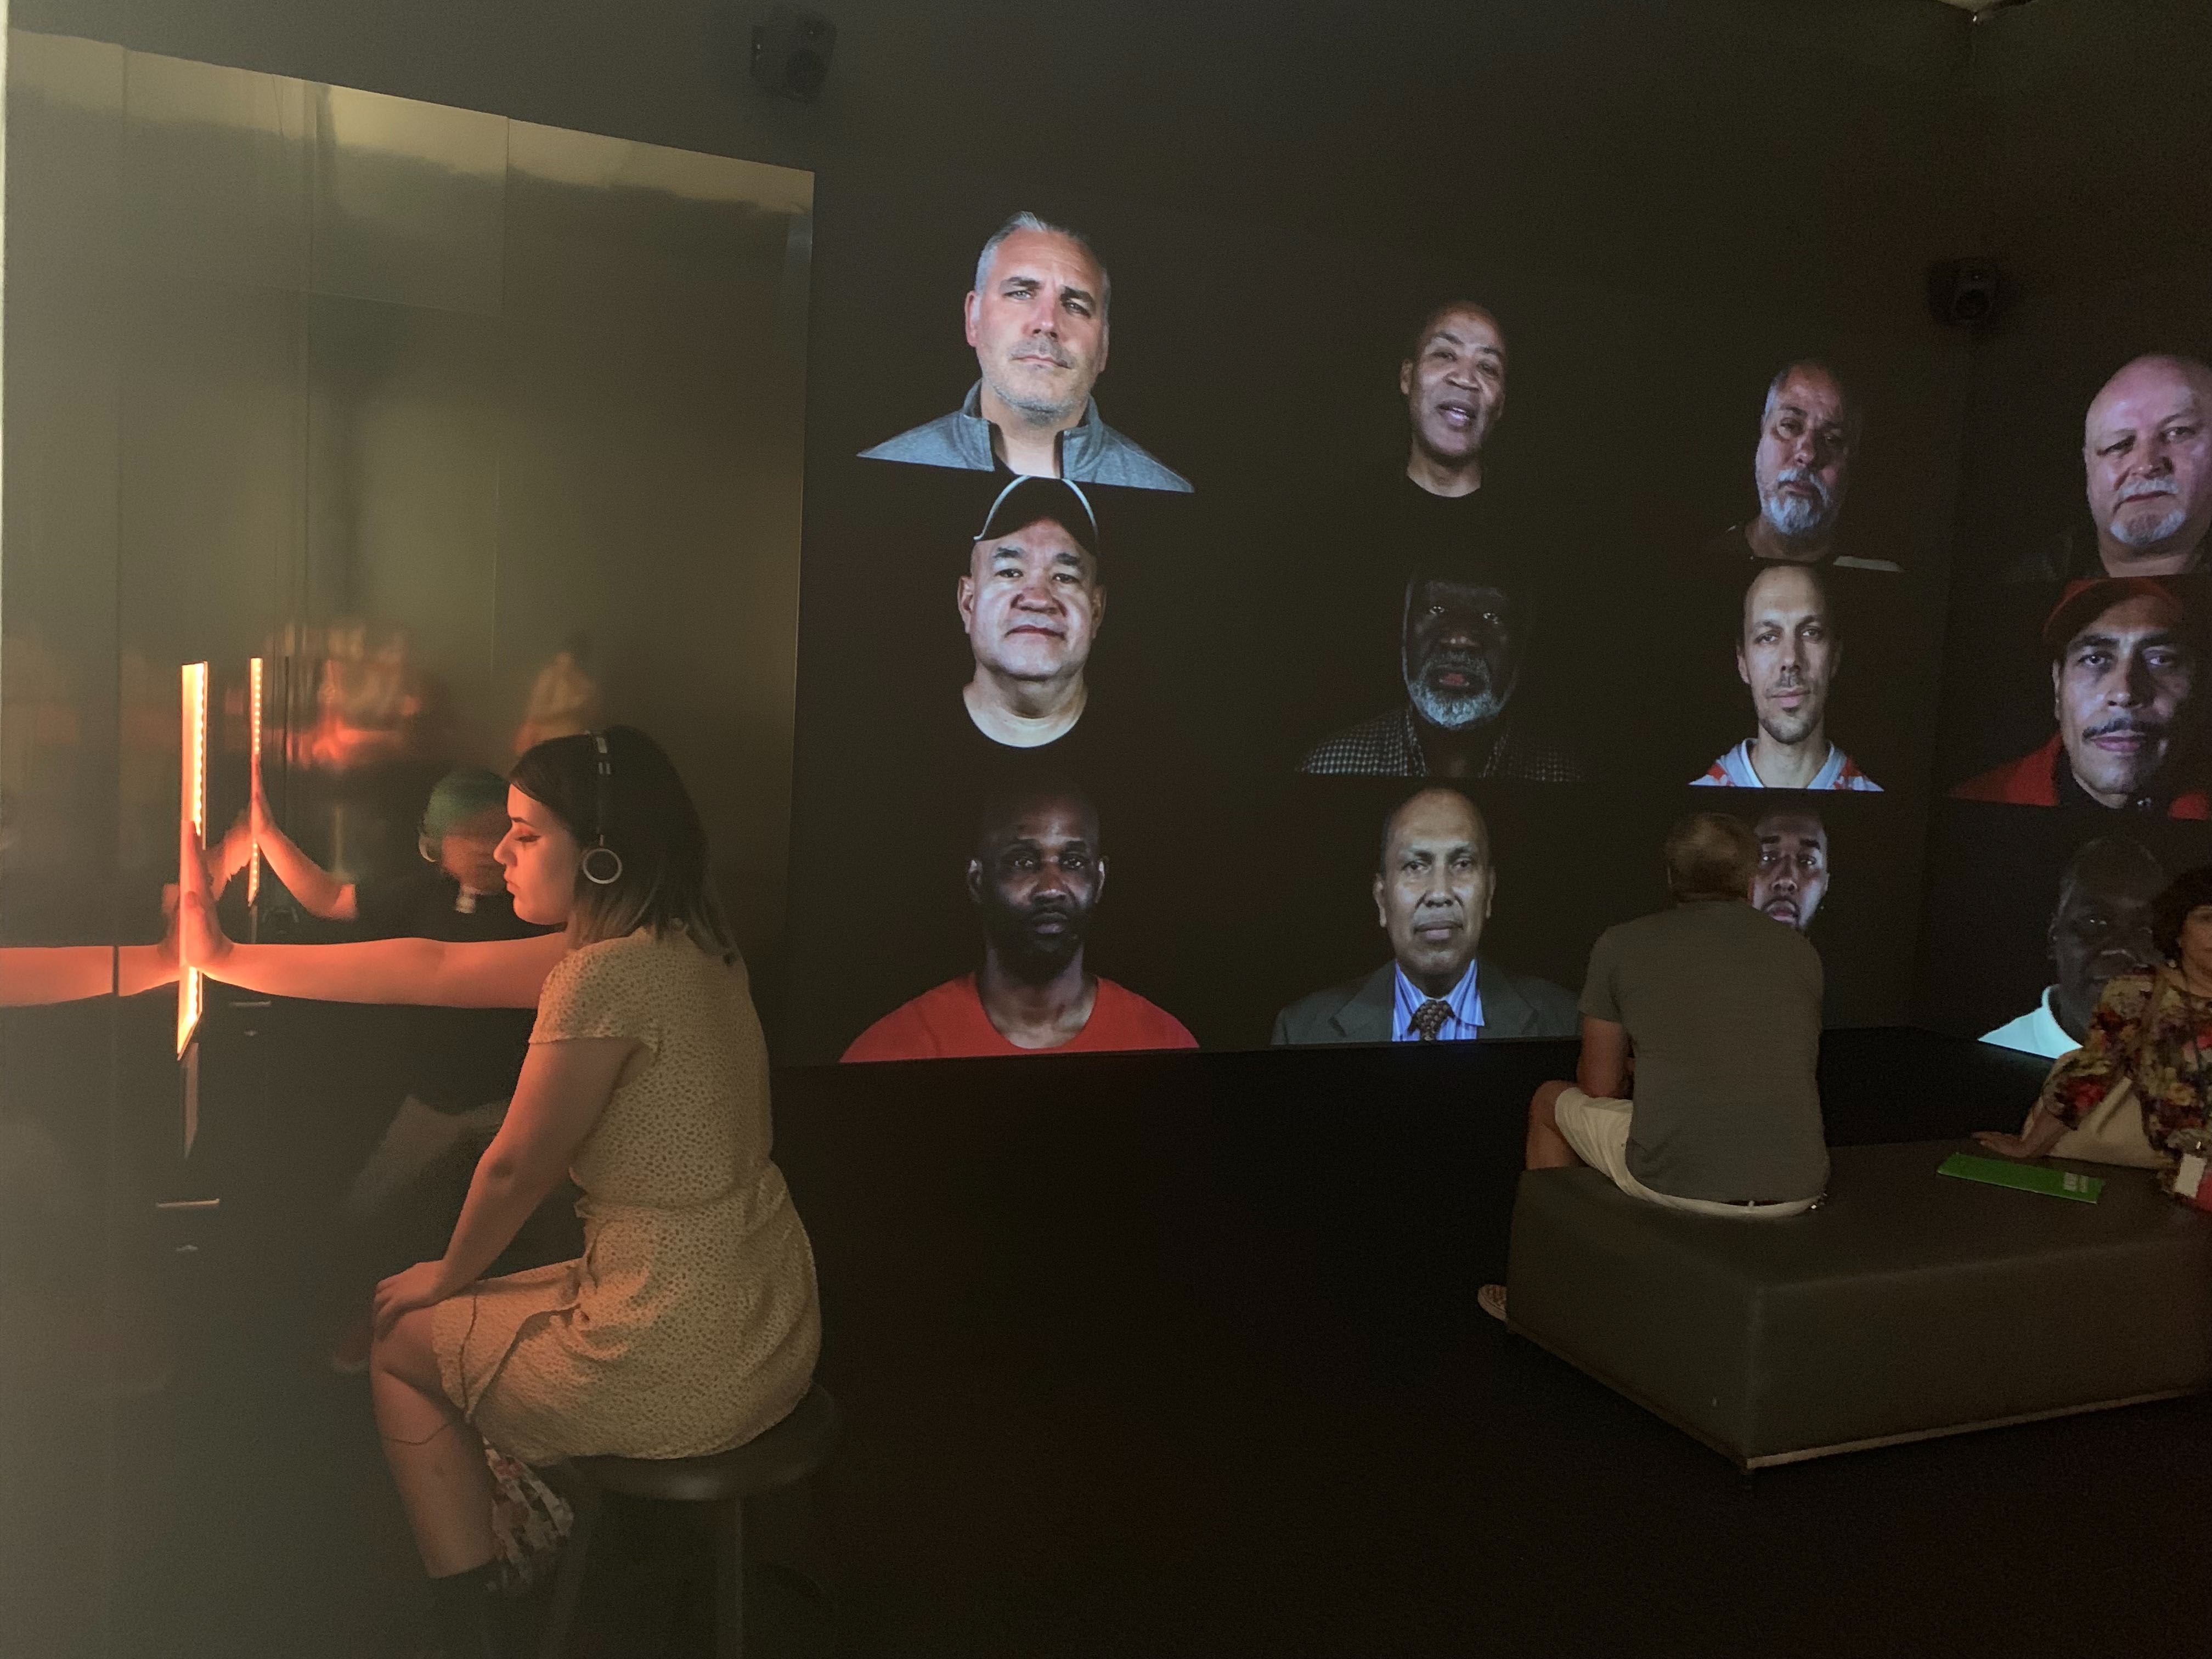 Photo of people sitting in front of projection screens displaying portraits